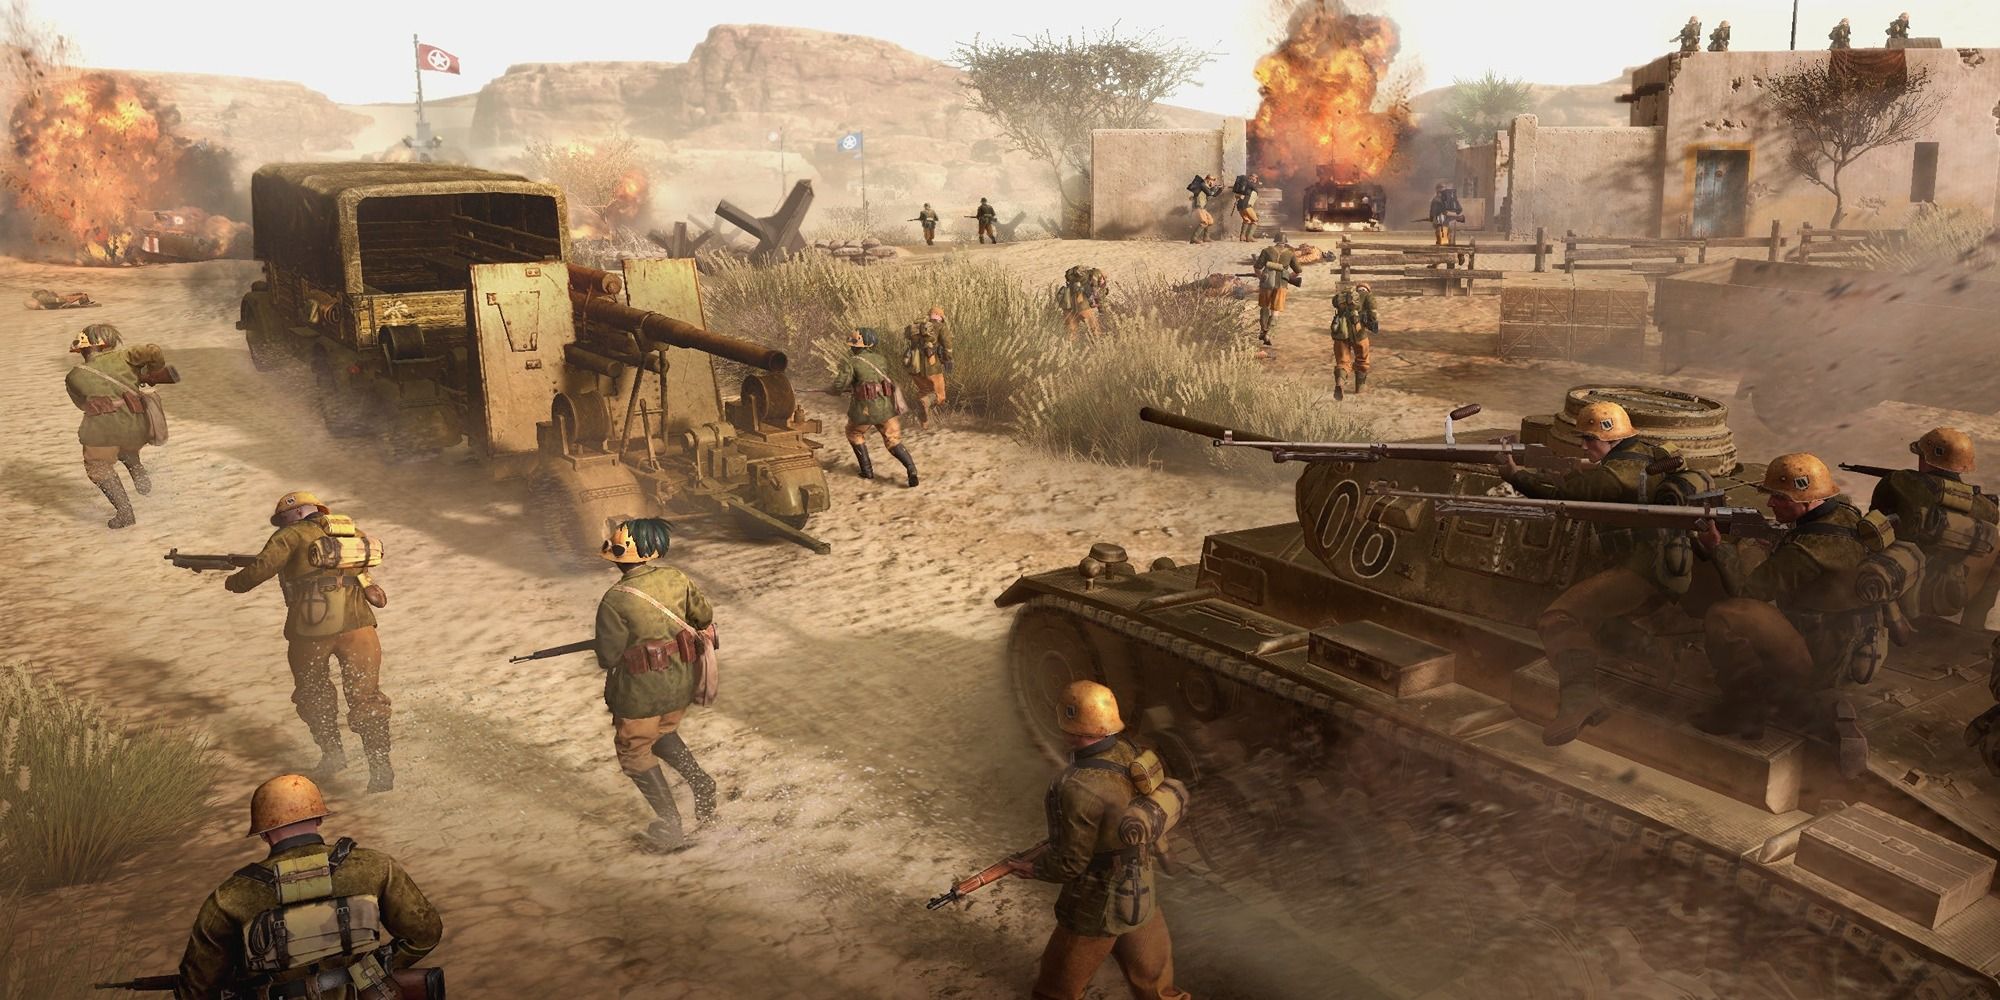 Company of Heroes 3 Console Release Date Revealed